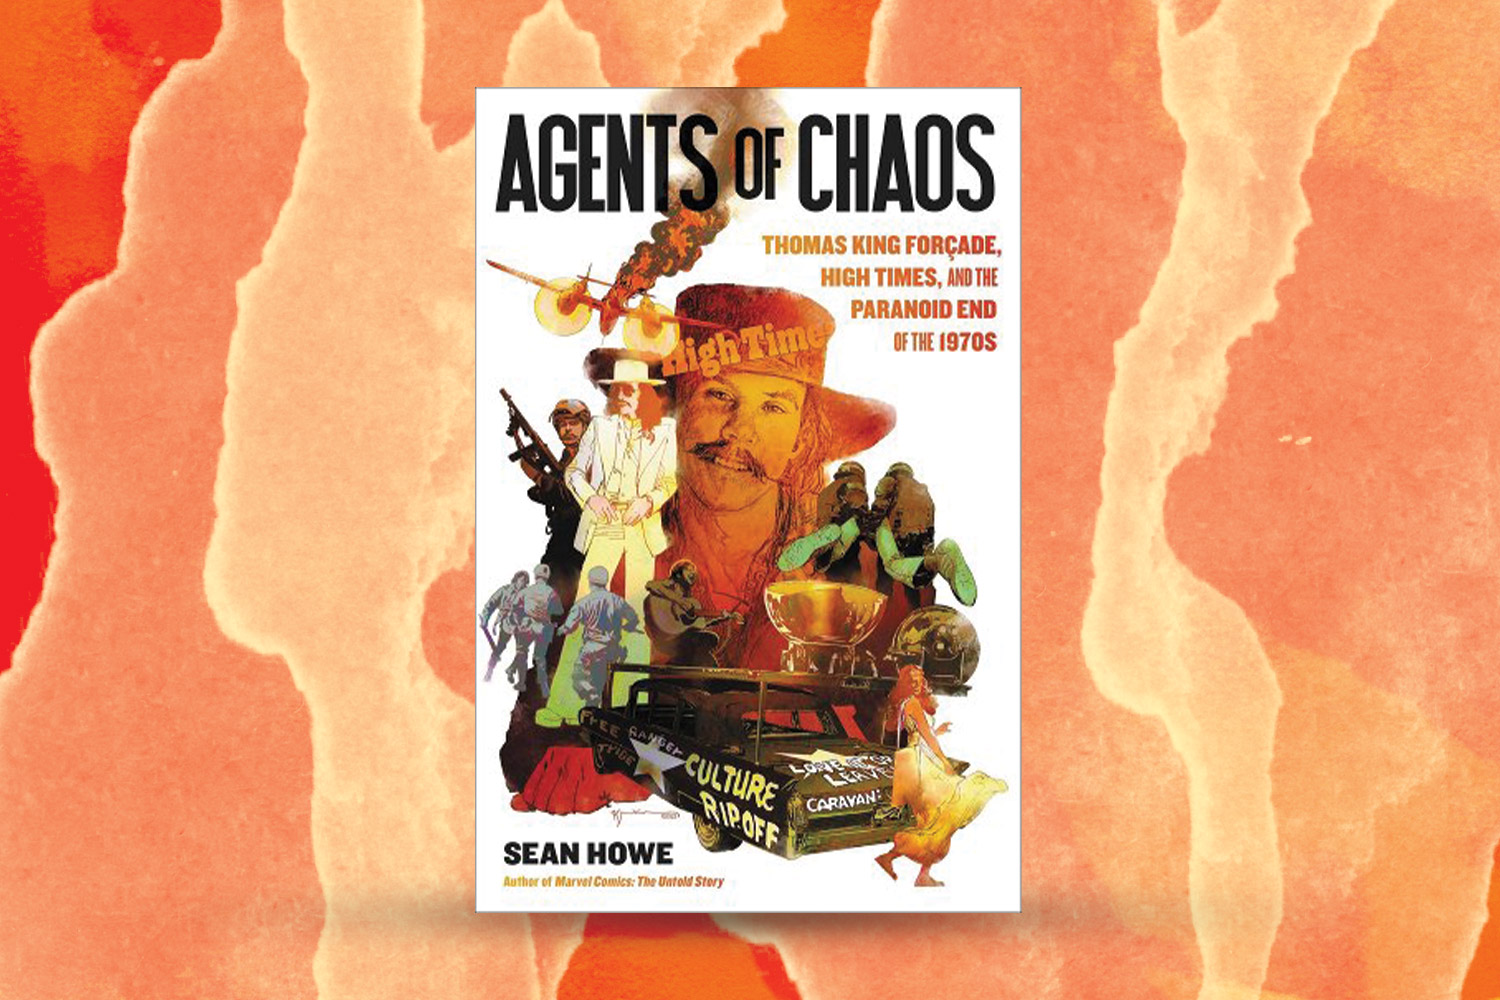 "Agents of Chaos" cover